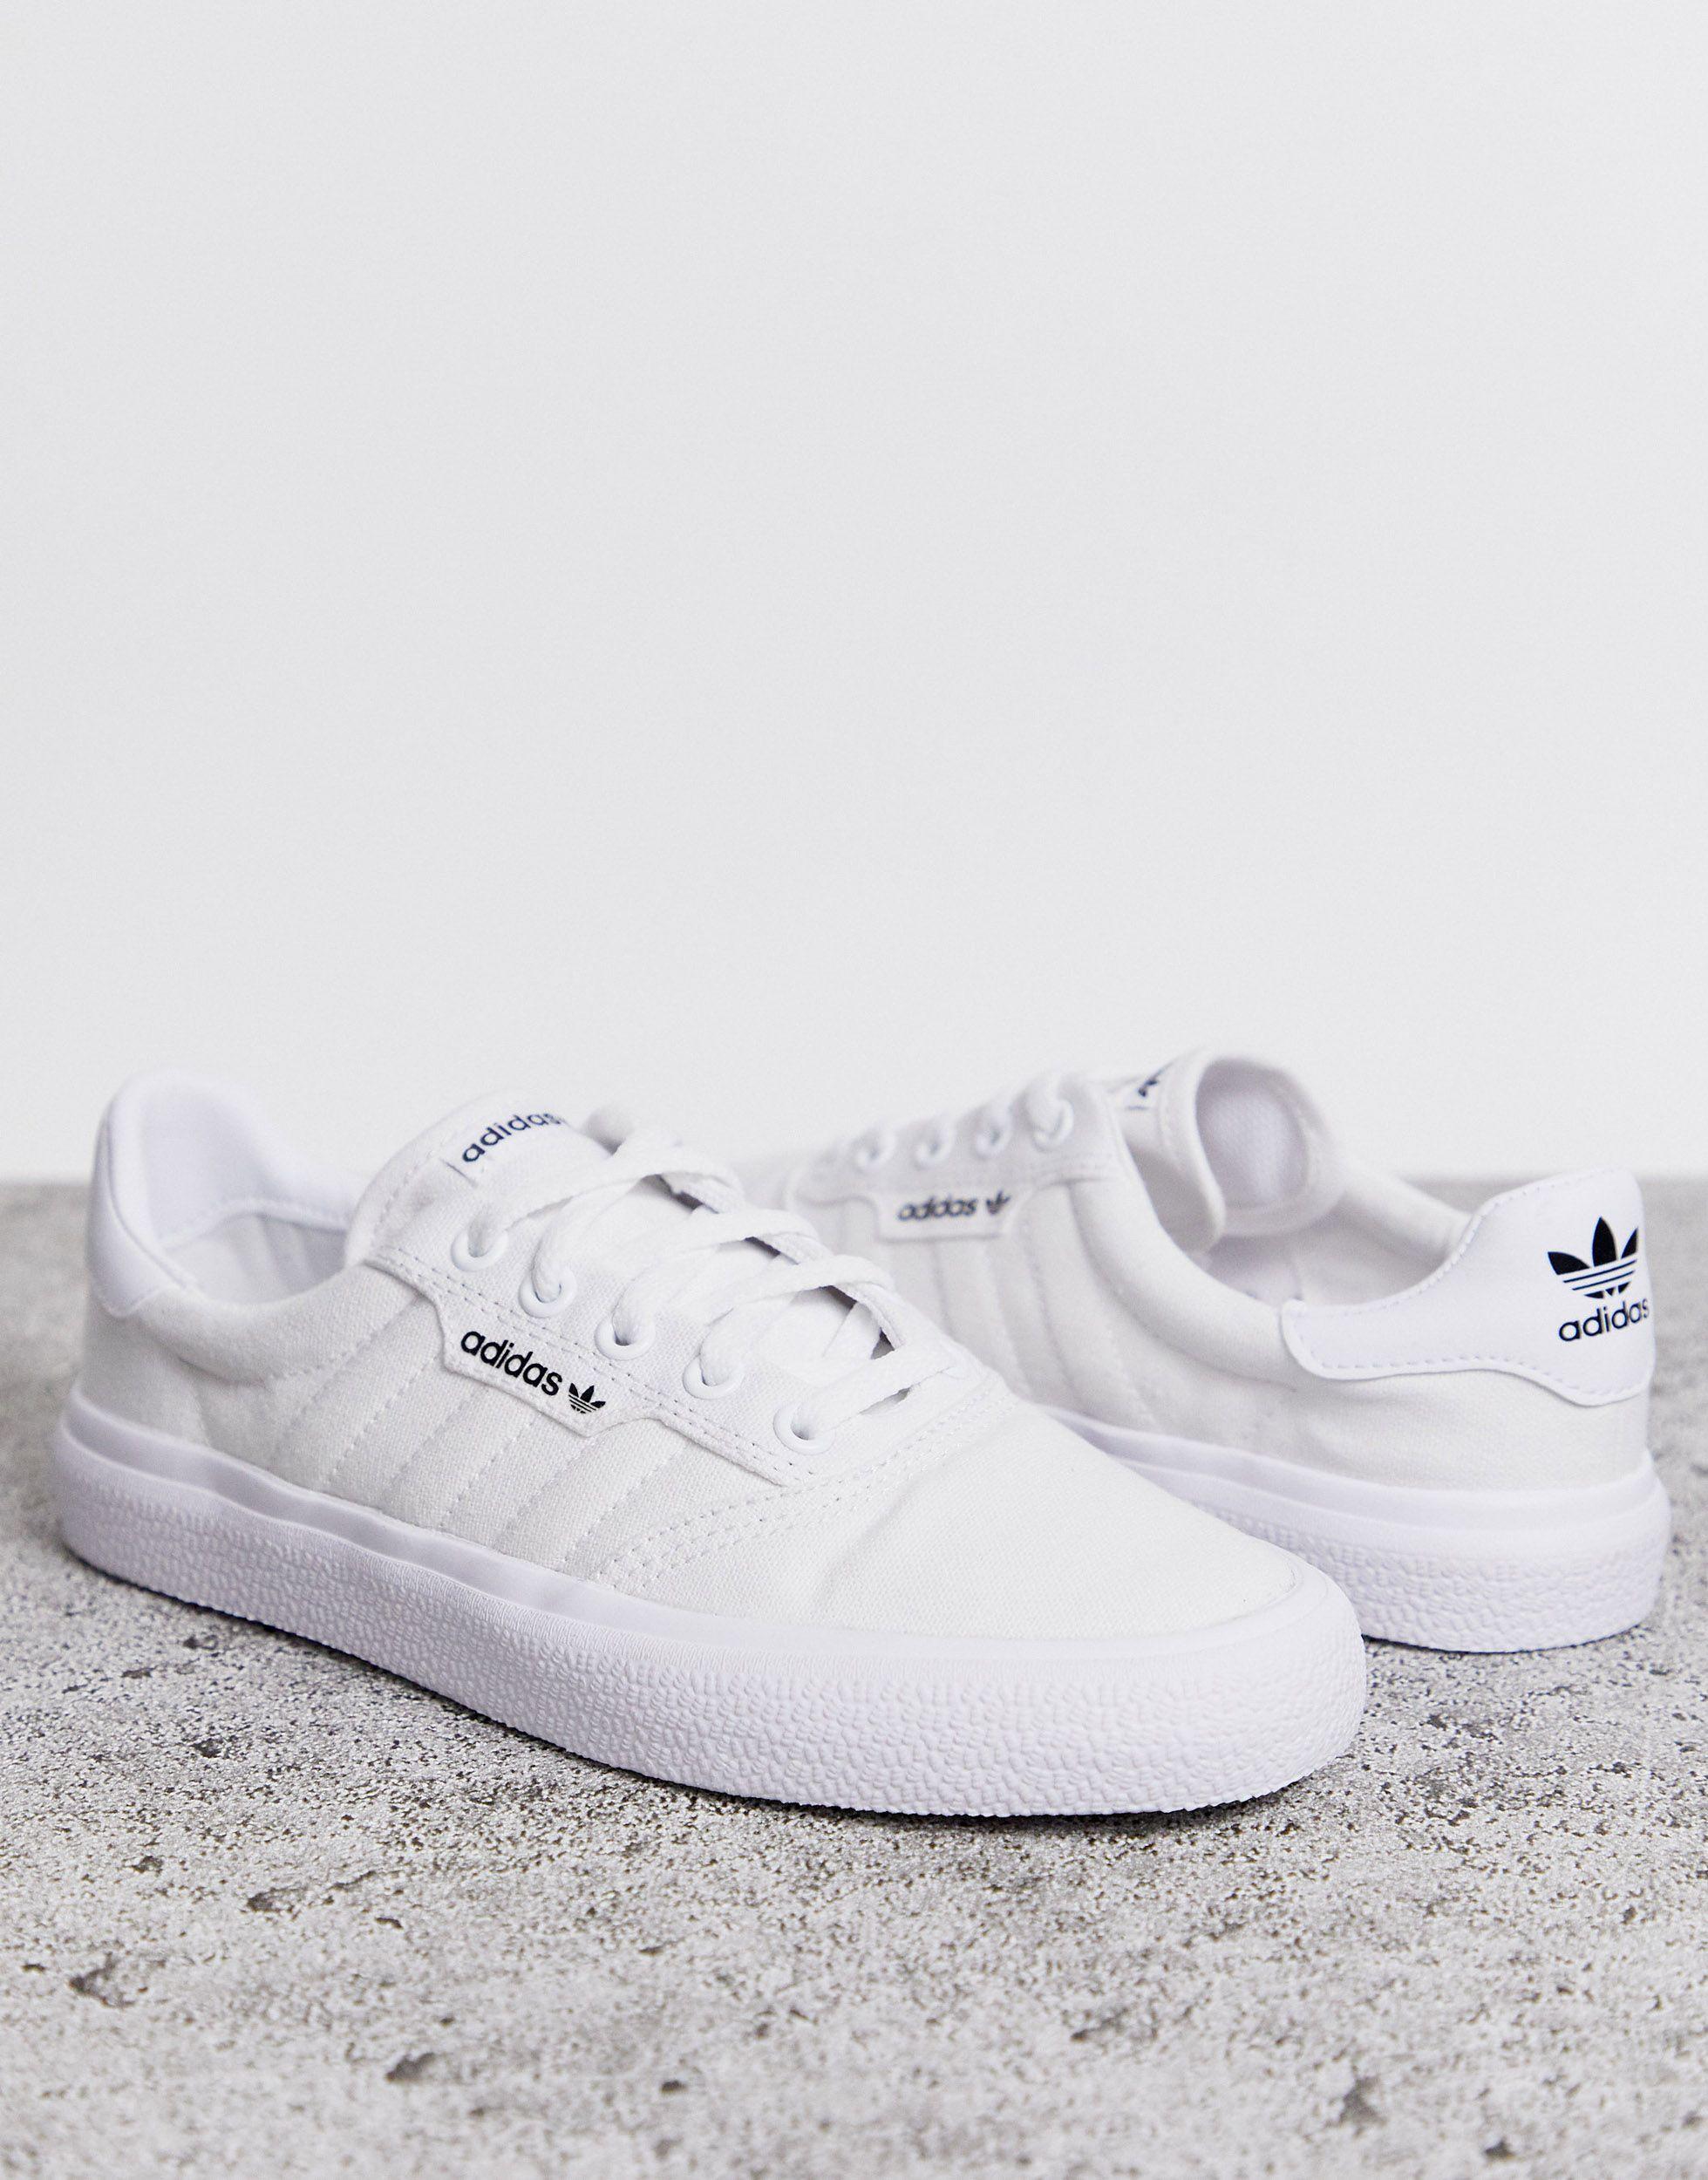 adidas Rubber 3mc Trainers in Gold/White/White (White) - Save 71 ... ارواج محمود سعيد